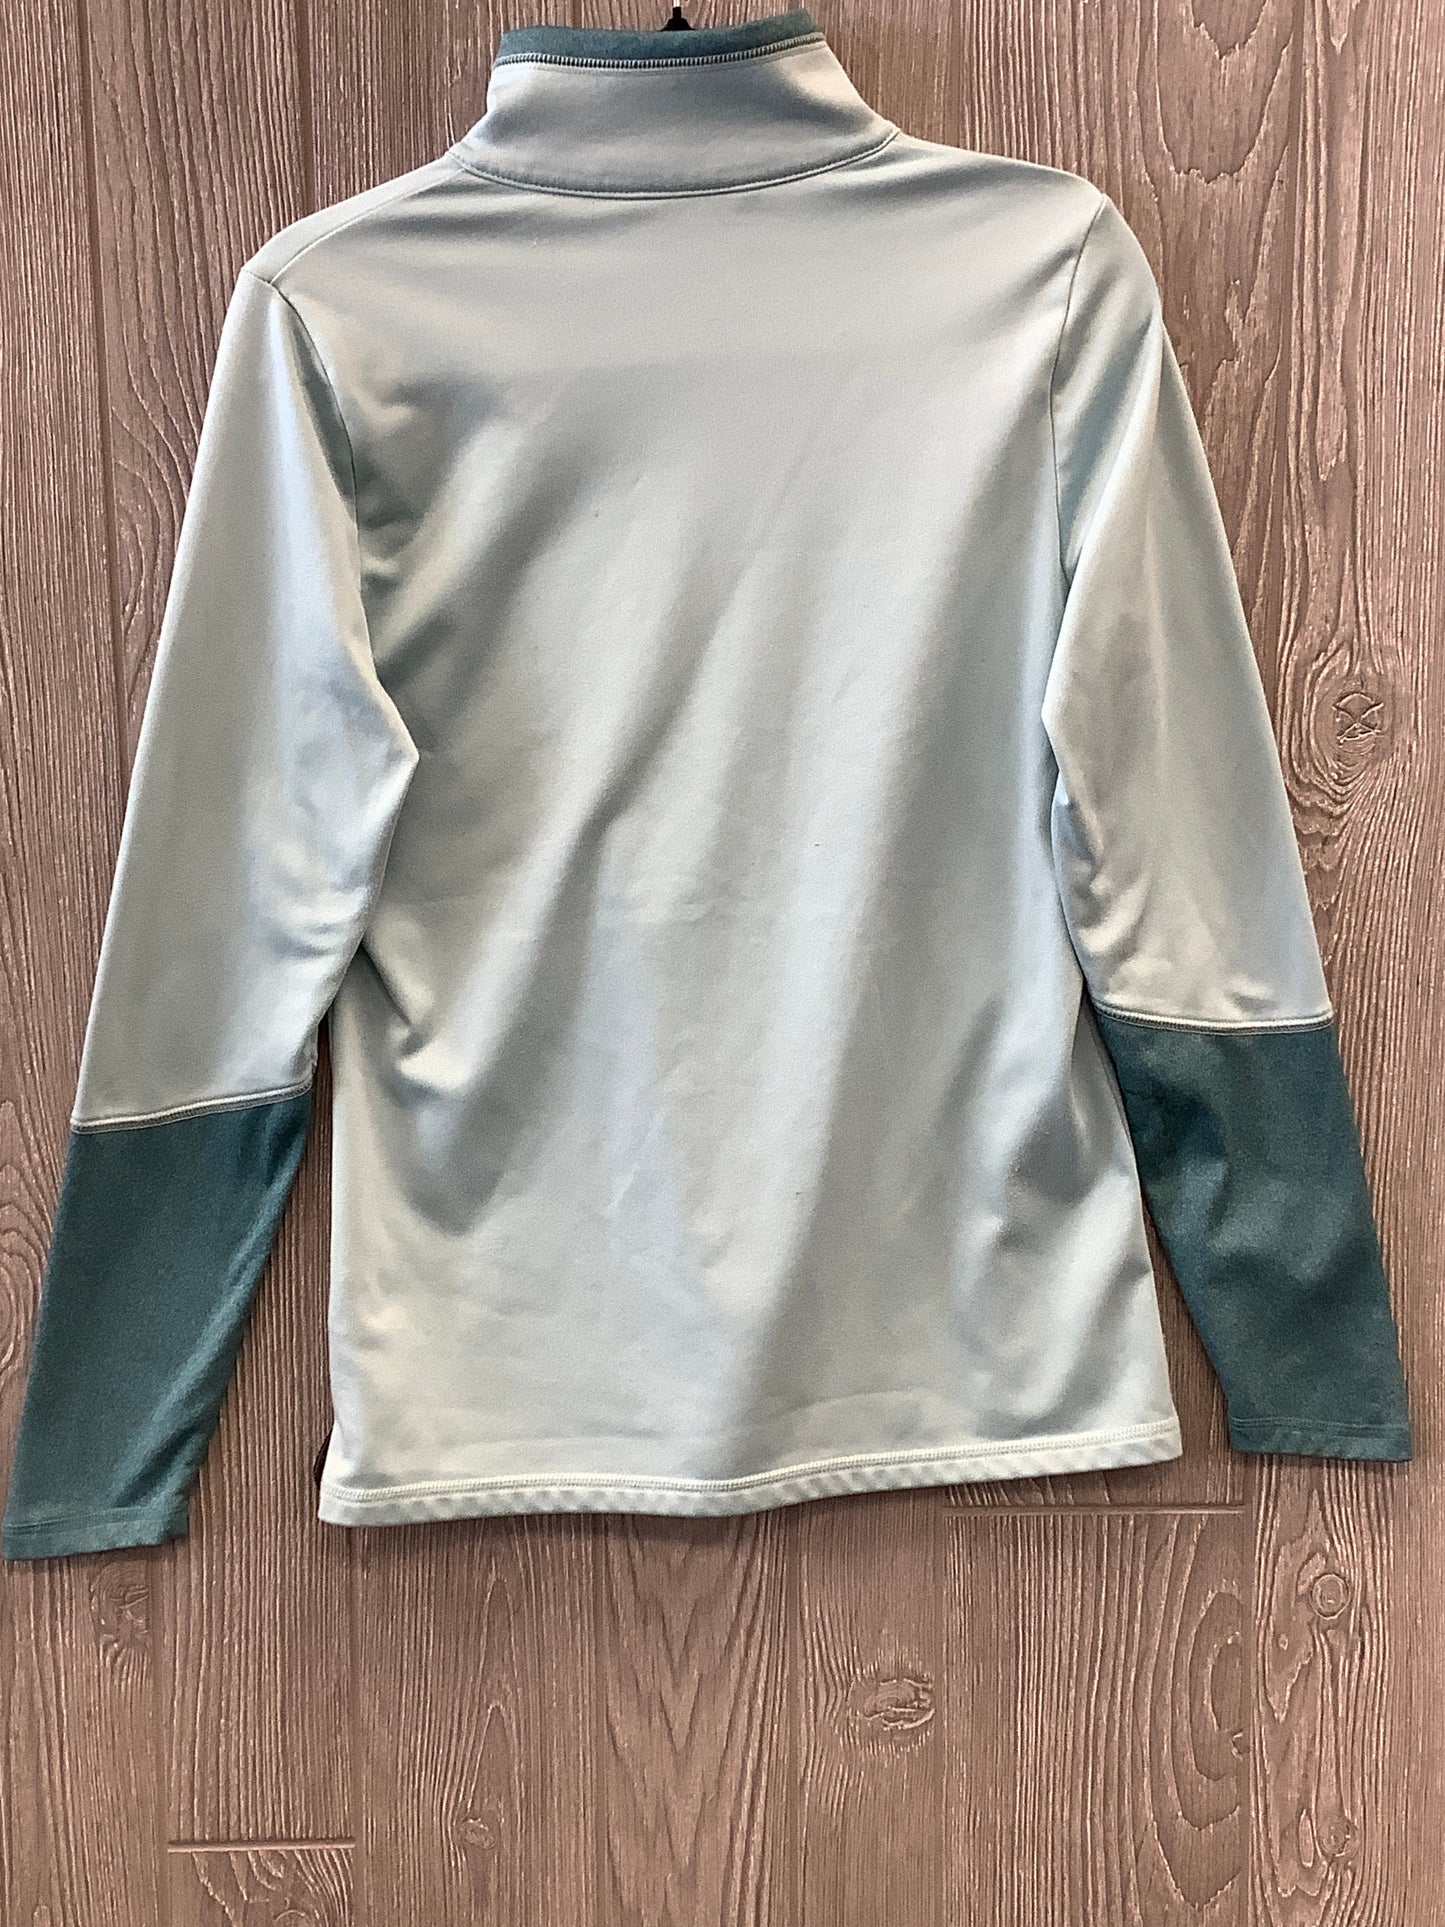 Athletic Top Long Sleeve Crewneck By North Face  Size: M